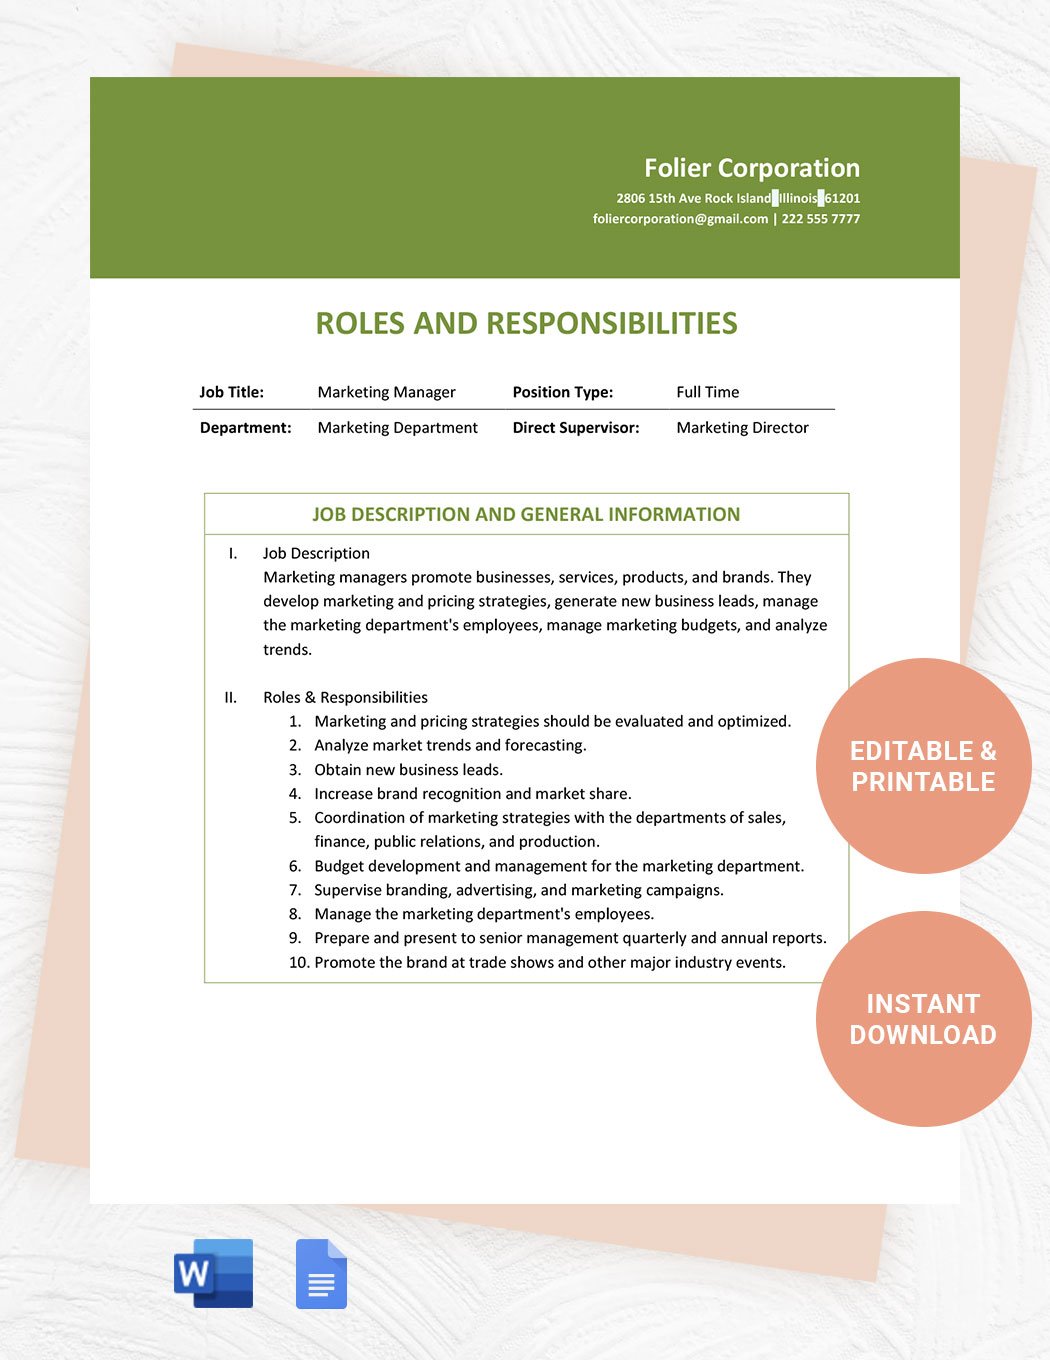 Corporate Roles And Responsibilities Template